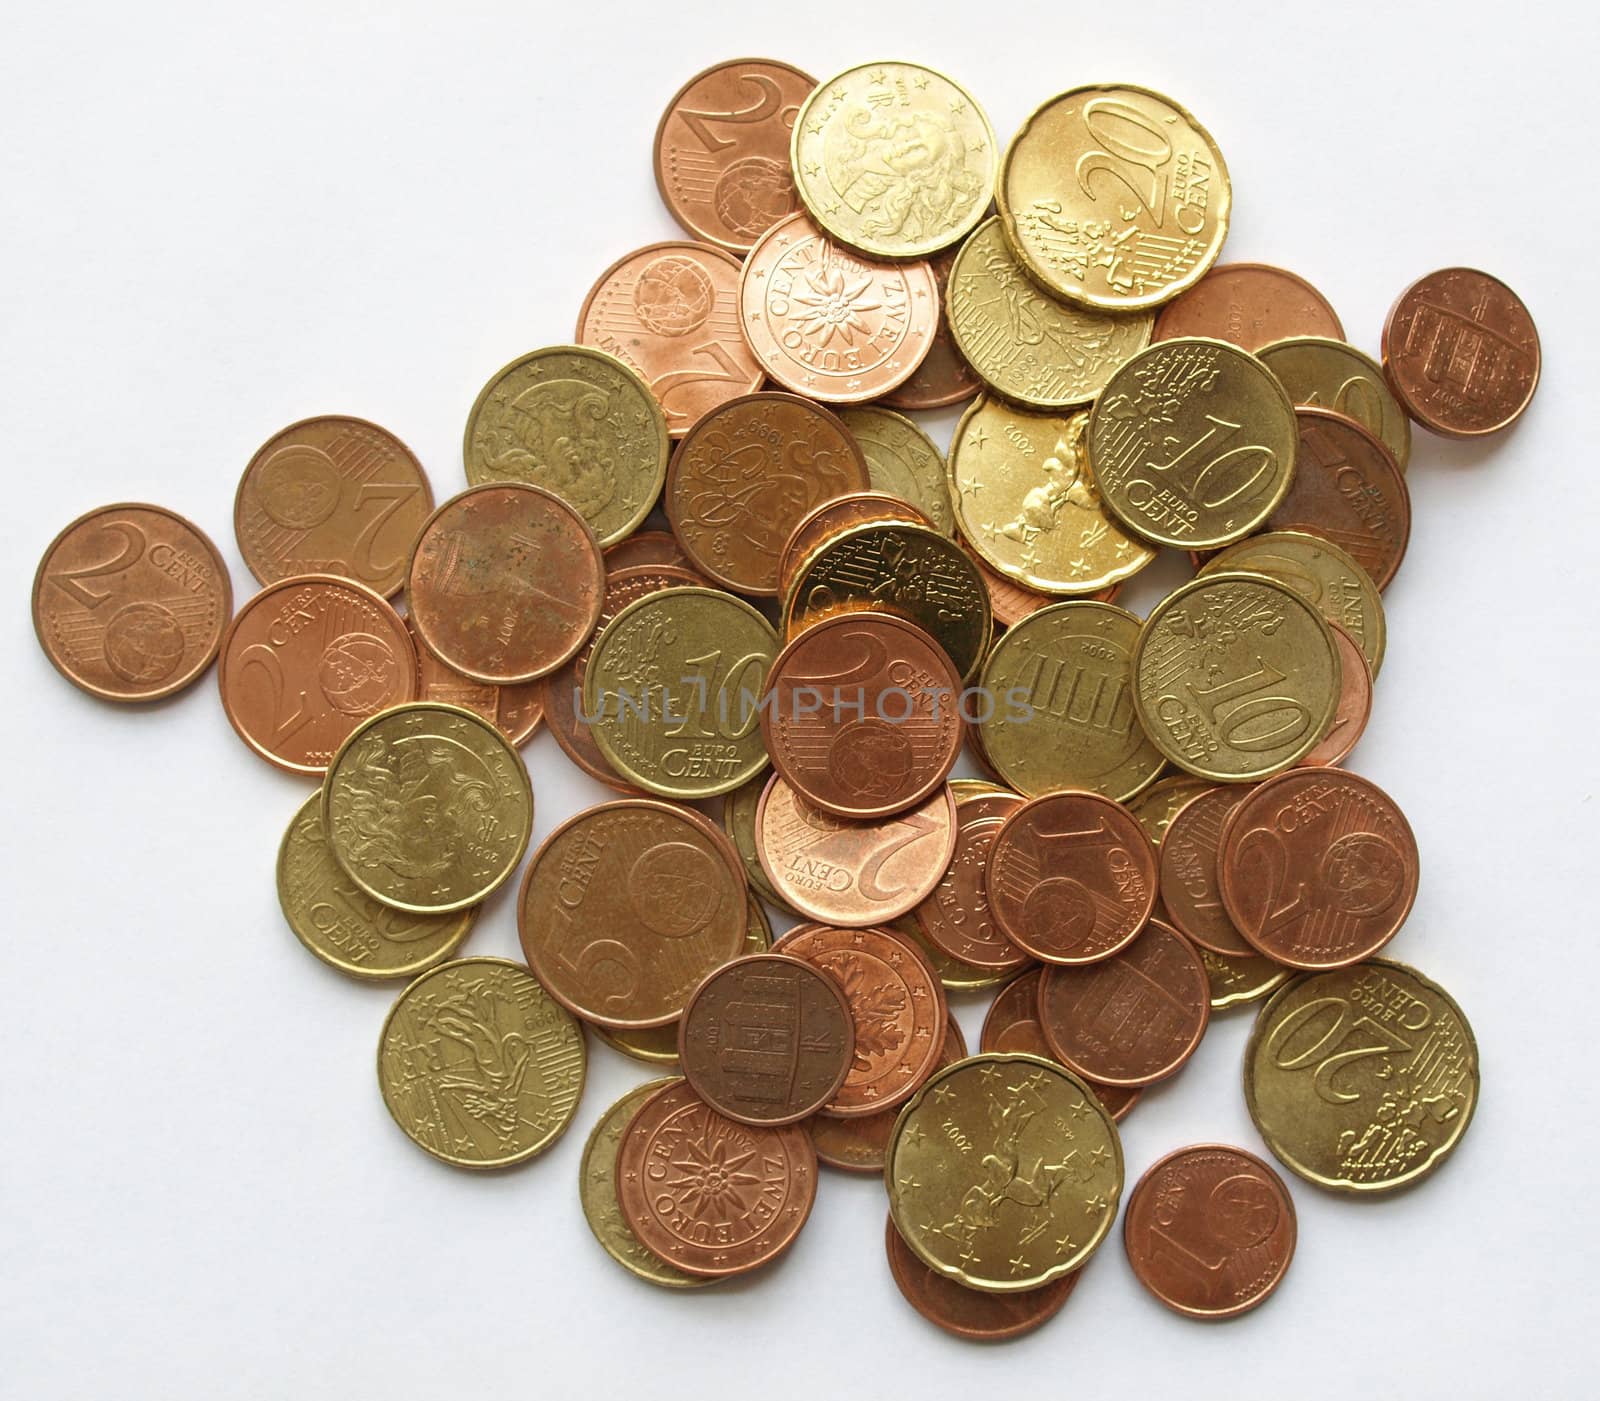 Euro coins by paolo77